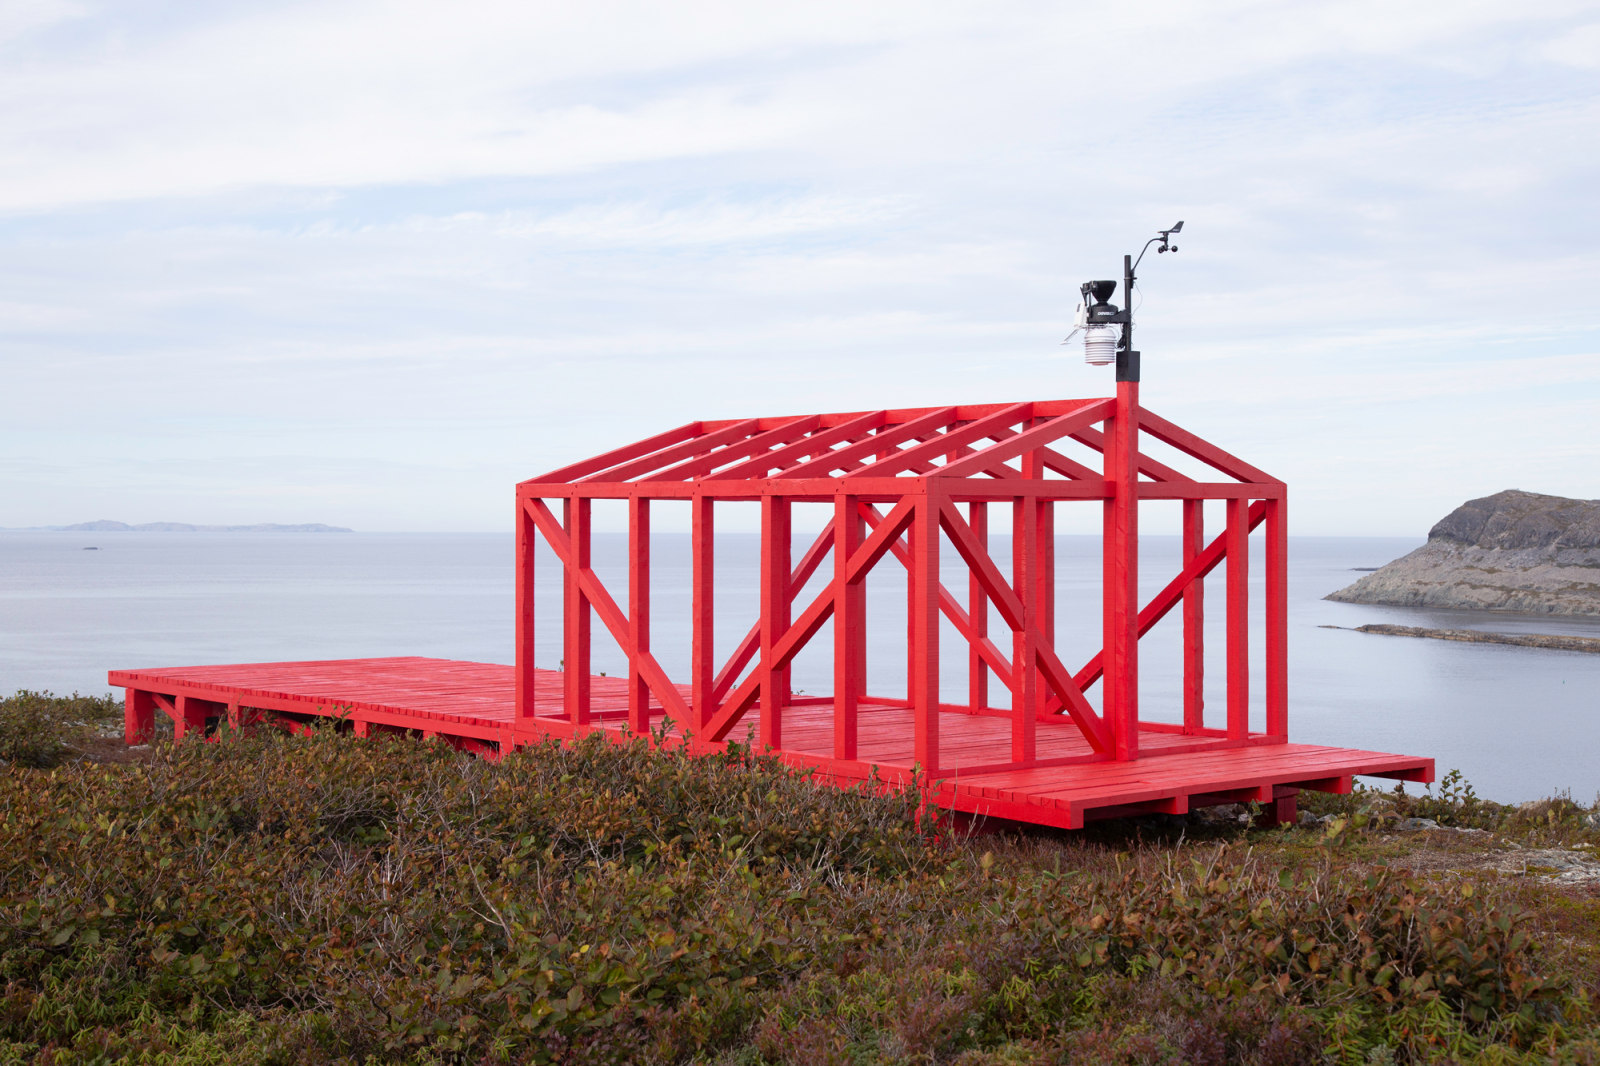 <div class="image_caption_container"><div class="image_caption"><p>Liam Gillick, <strong>A Variability Quantifier (aka The Fogo Island Red Weather Station)</strong>, Fogo Island, 2022. Photo © Joshua Jensen</p></div></div>